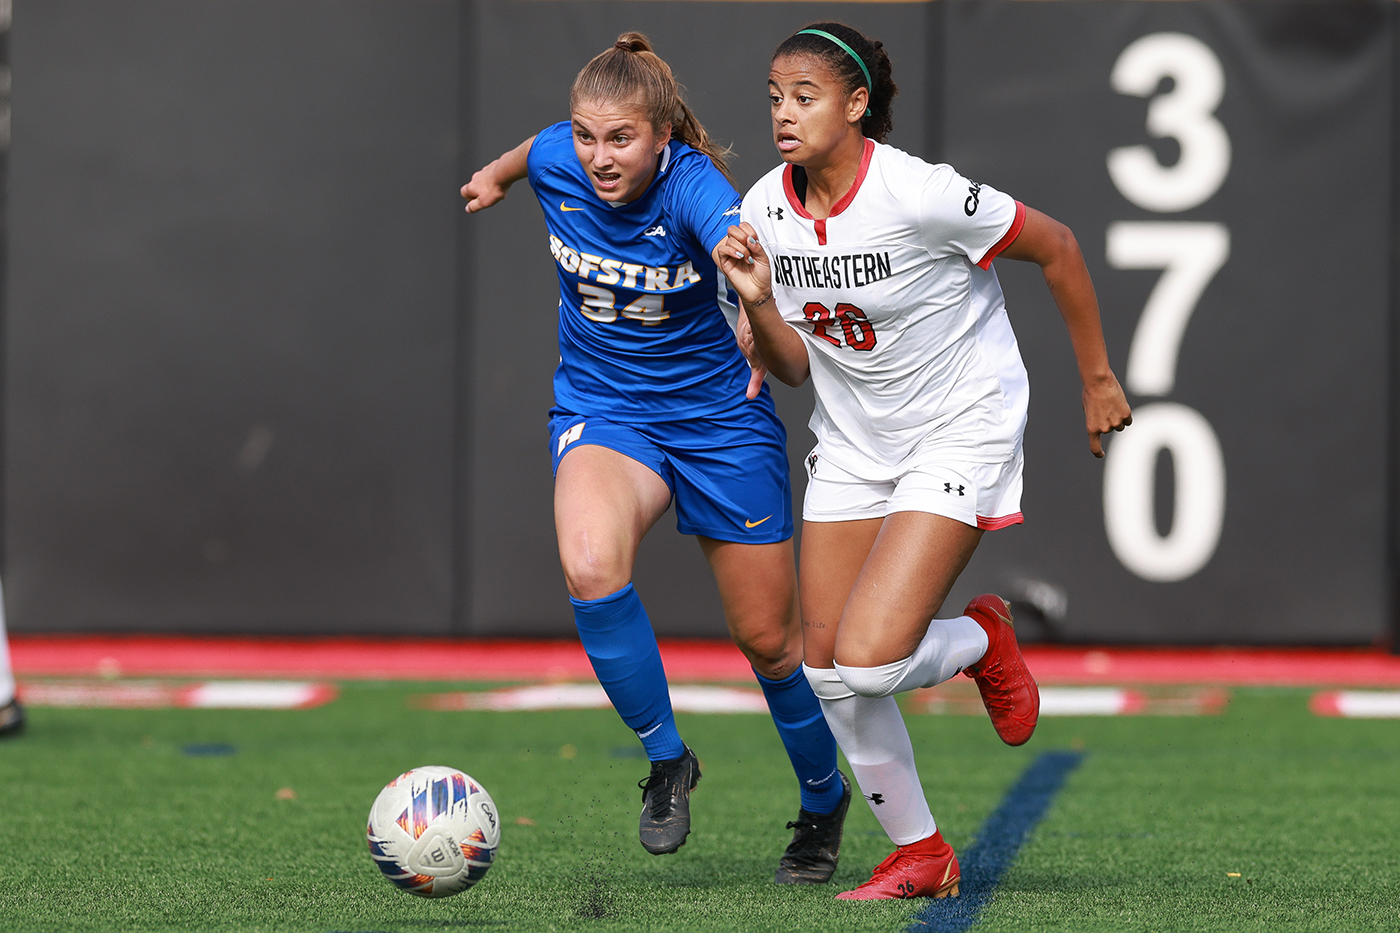 A player on the Northeastern women's soccer team is racing after a soccer ball next to a rival player.